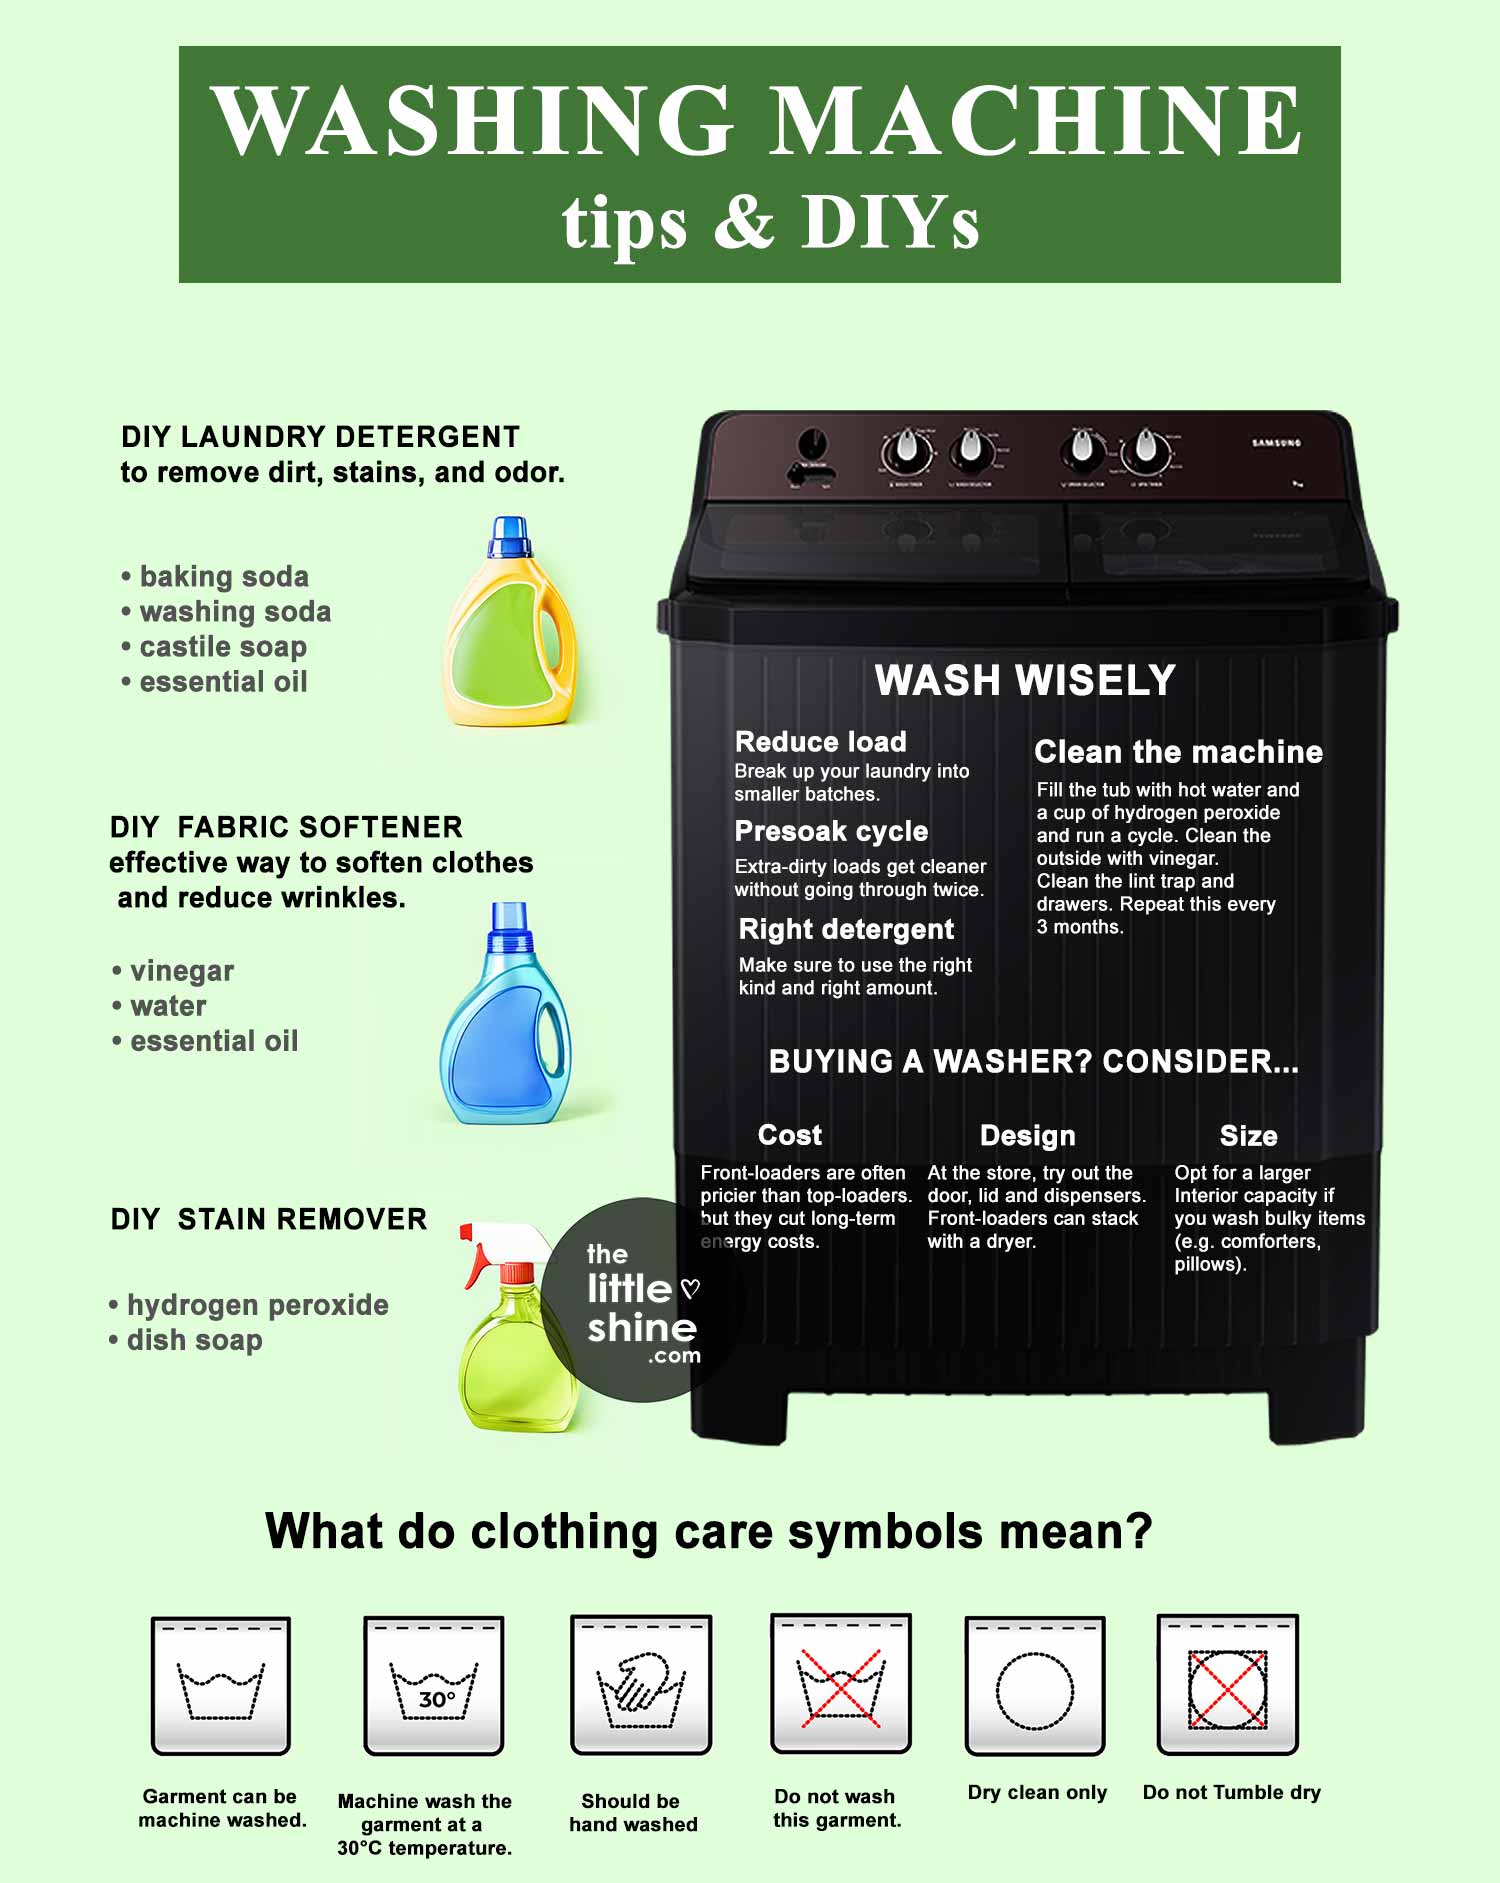 How to Wash Wisely| Tips for Buying A Washer